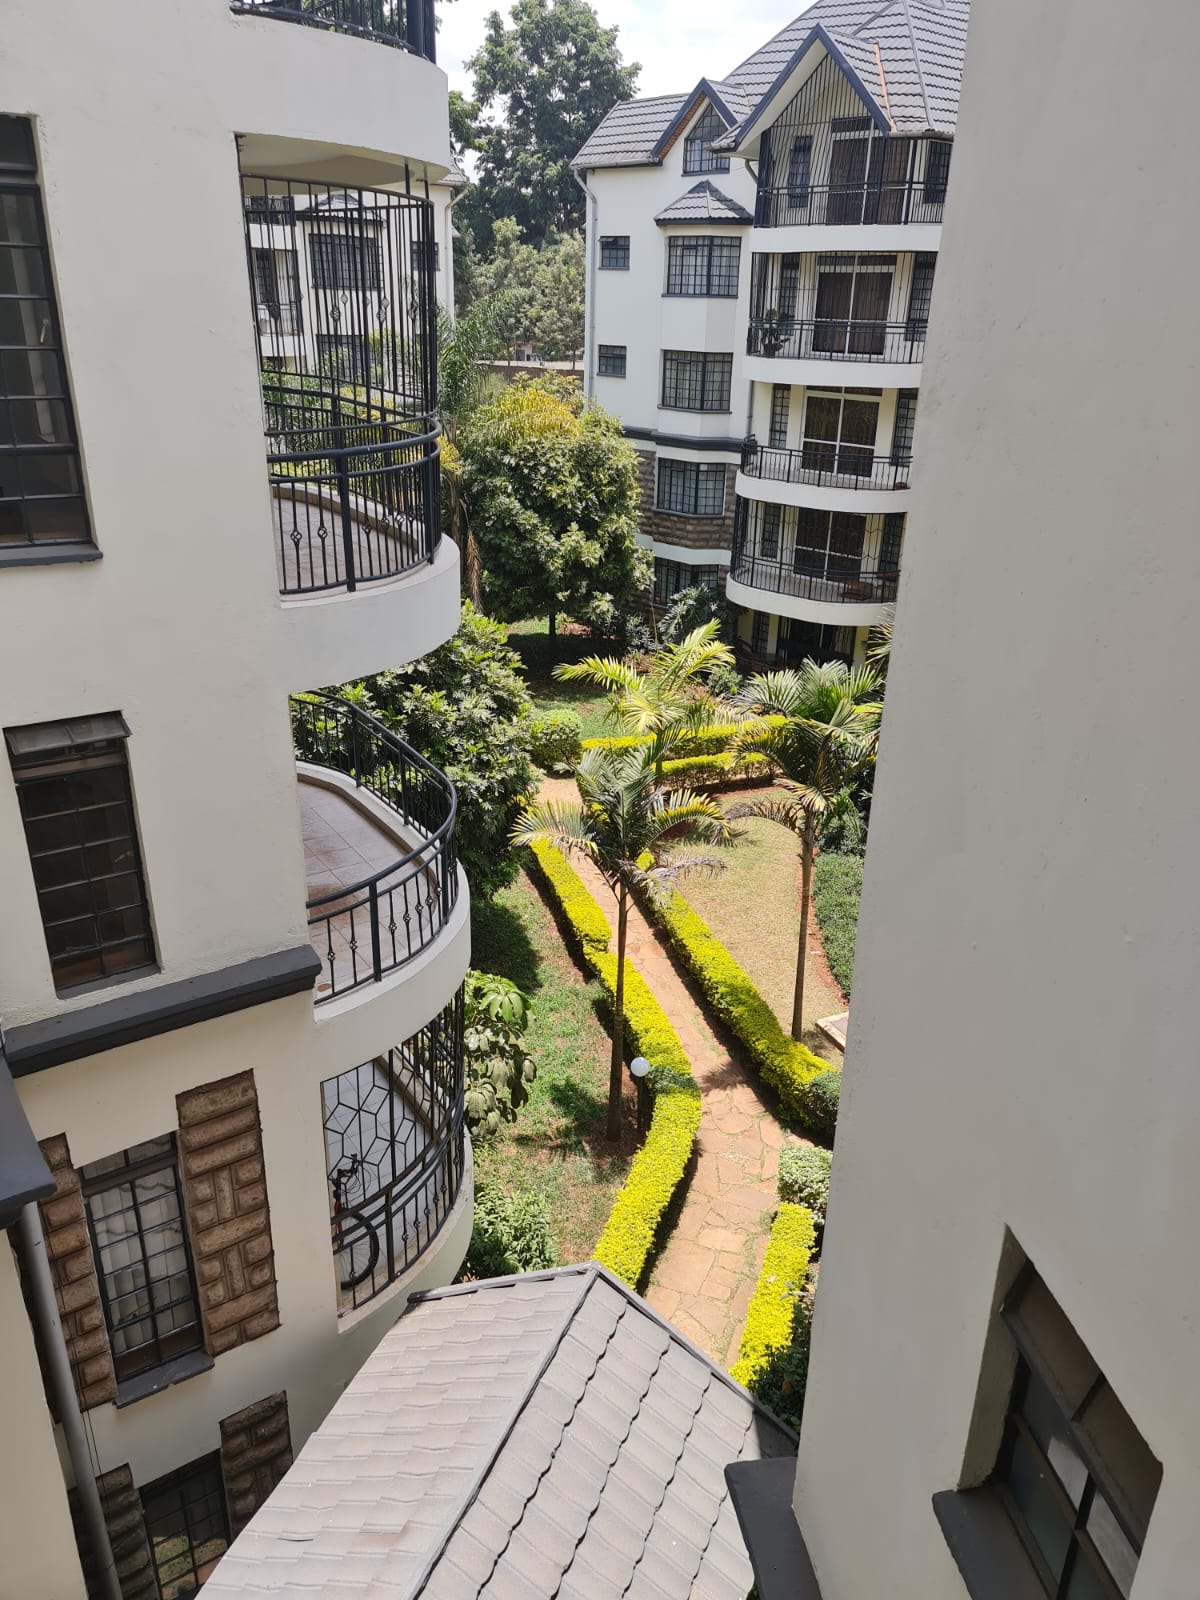 3 Bedroom Apartment Plus DSQ Unfurnished in Lavington with Beautiful Garden and exciting amenities for Rent at Ksh95k Per Month (17)